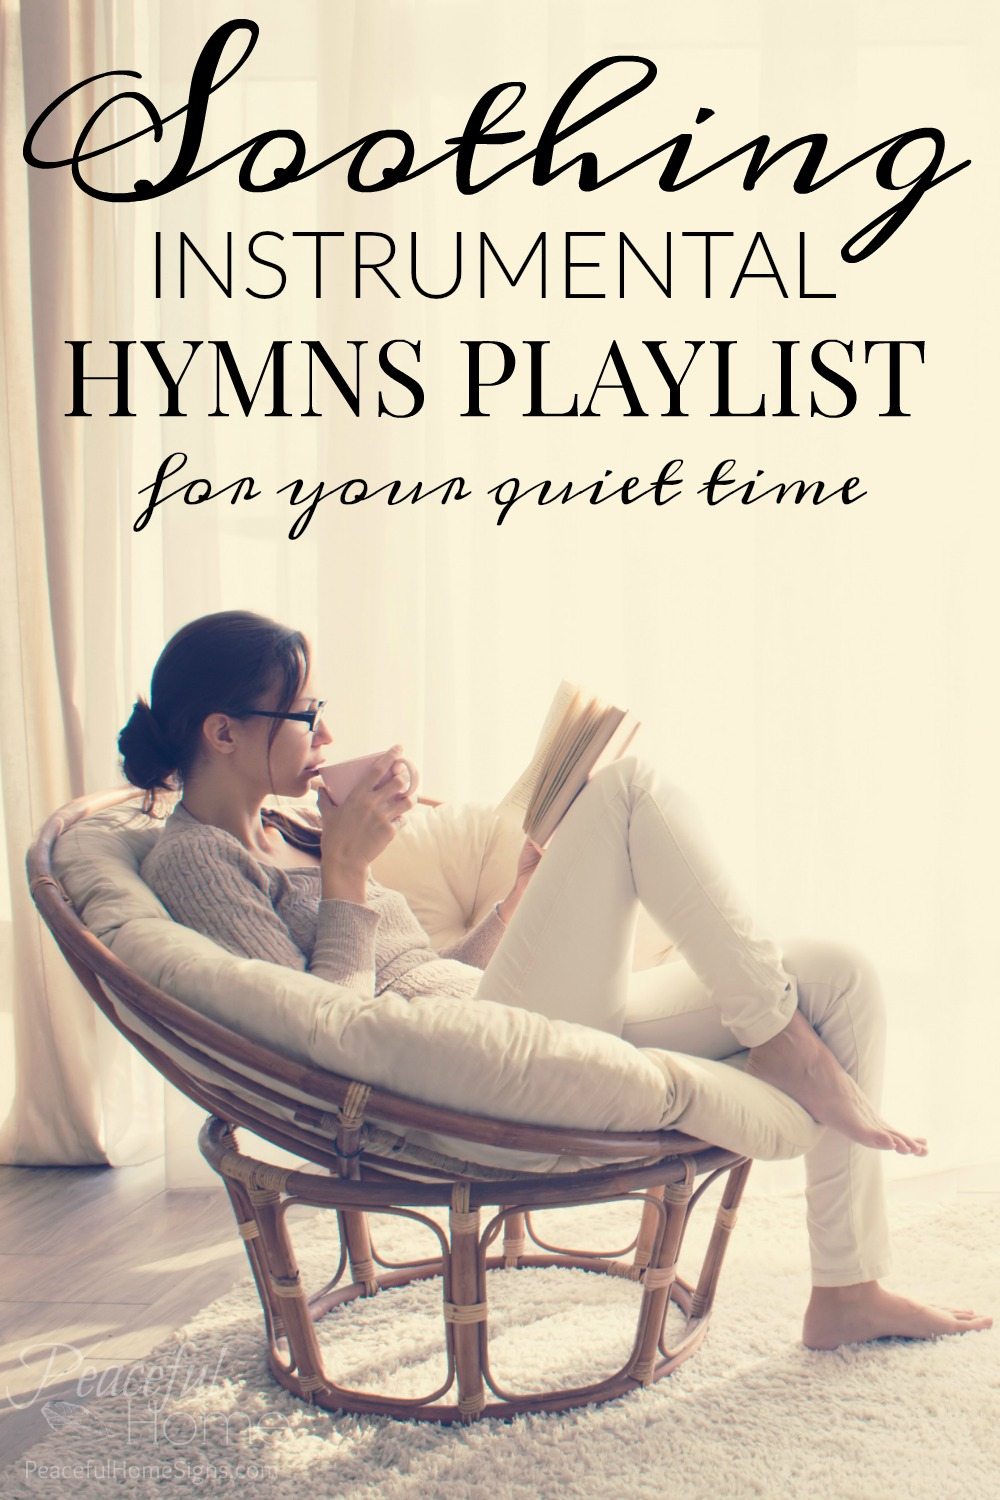 Hymns Playlist | Quiet time music | Instrumental Hymns Playlist | Music to play while bible reading | Music for prayer time | Old Christian Music | Playlist for quiet time | Soothing Playlist | Favorite Hymns | Classic Hymns